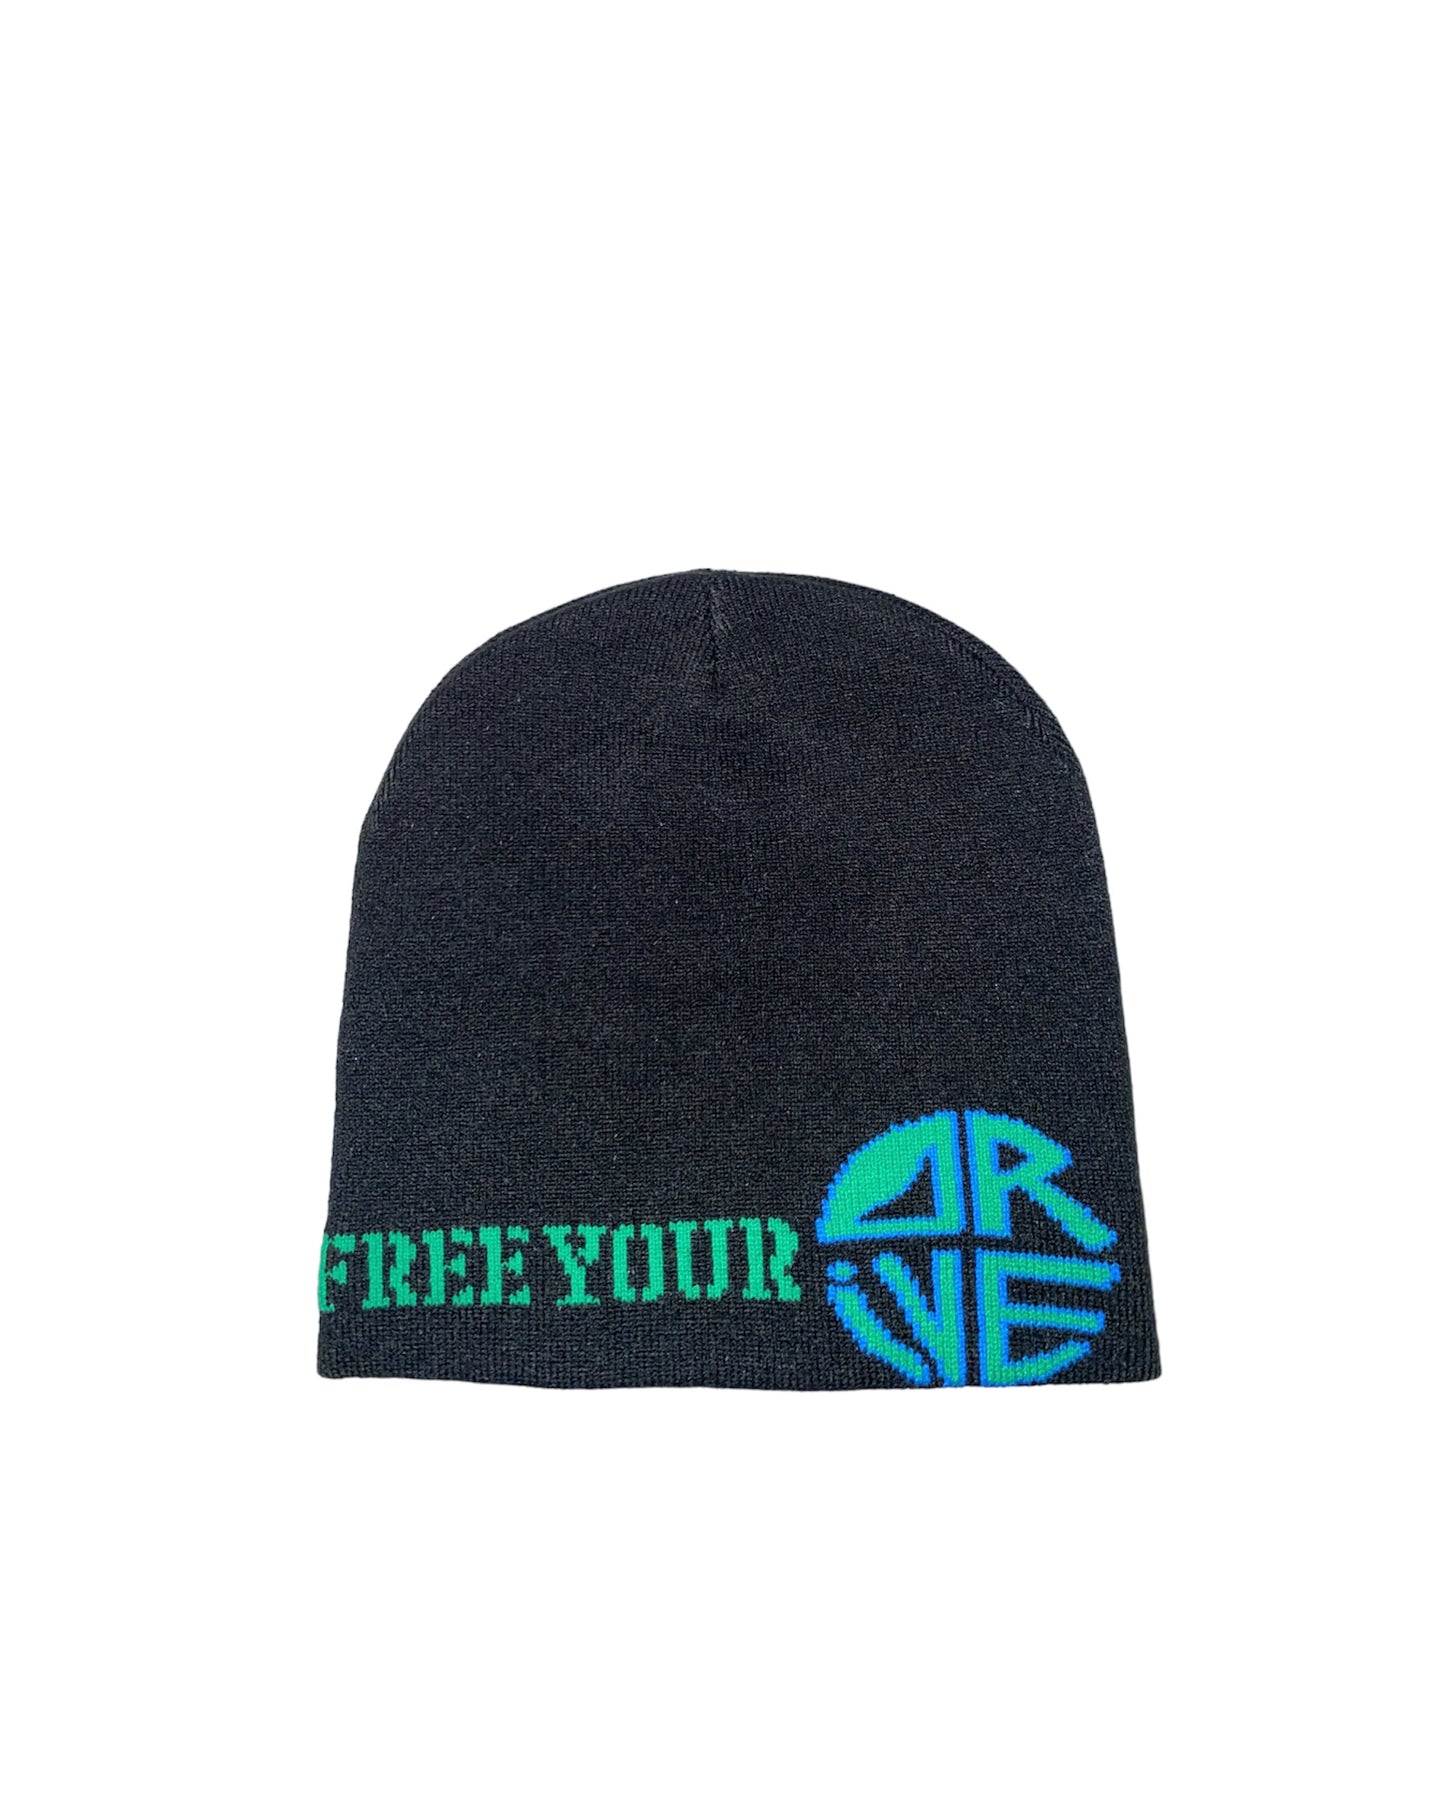 “Free your drive” Beanie